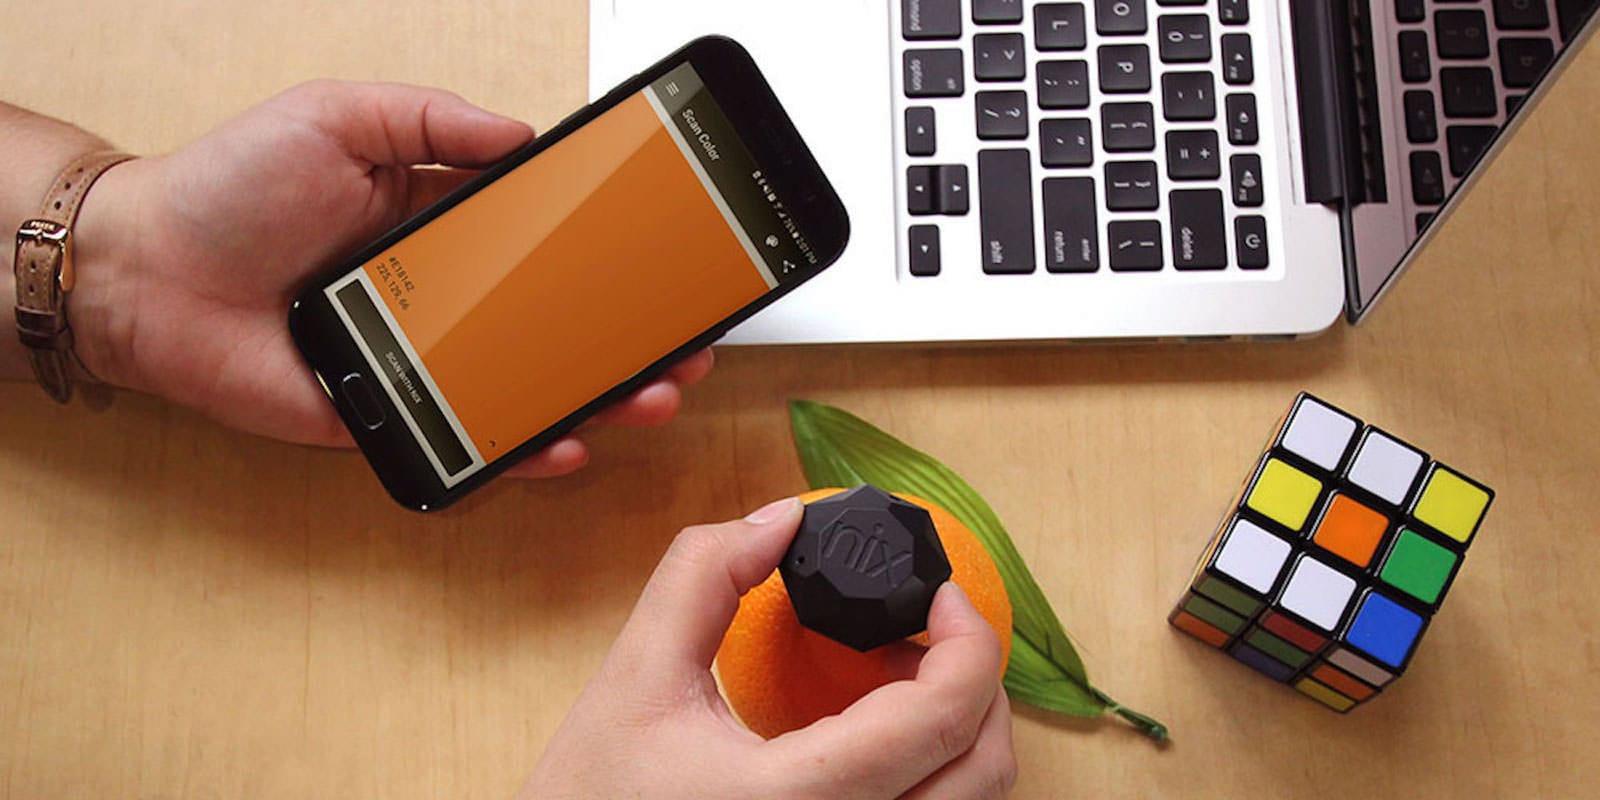 This ping pong ball-sized sensor offers precise color codes for paint or digital use.